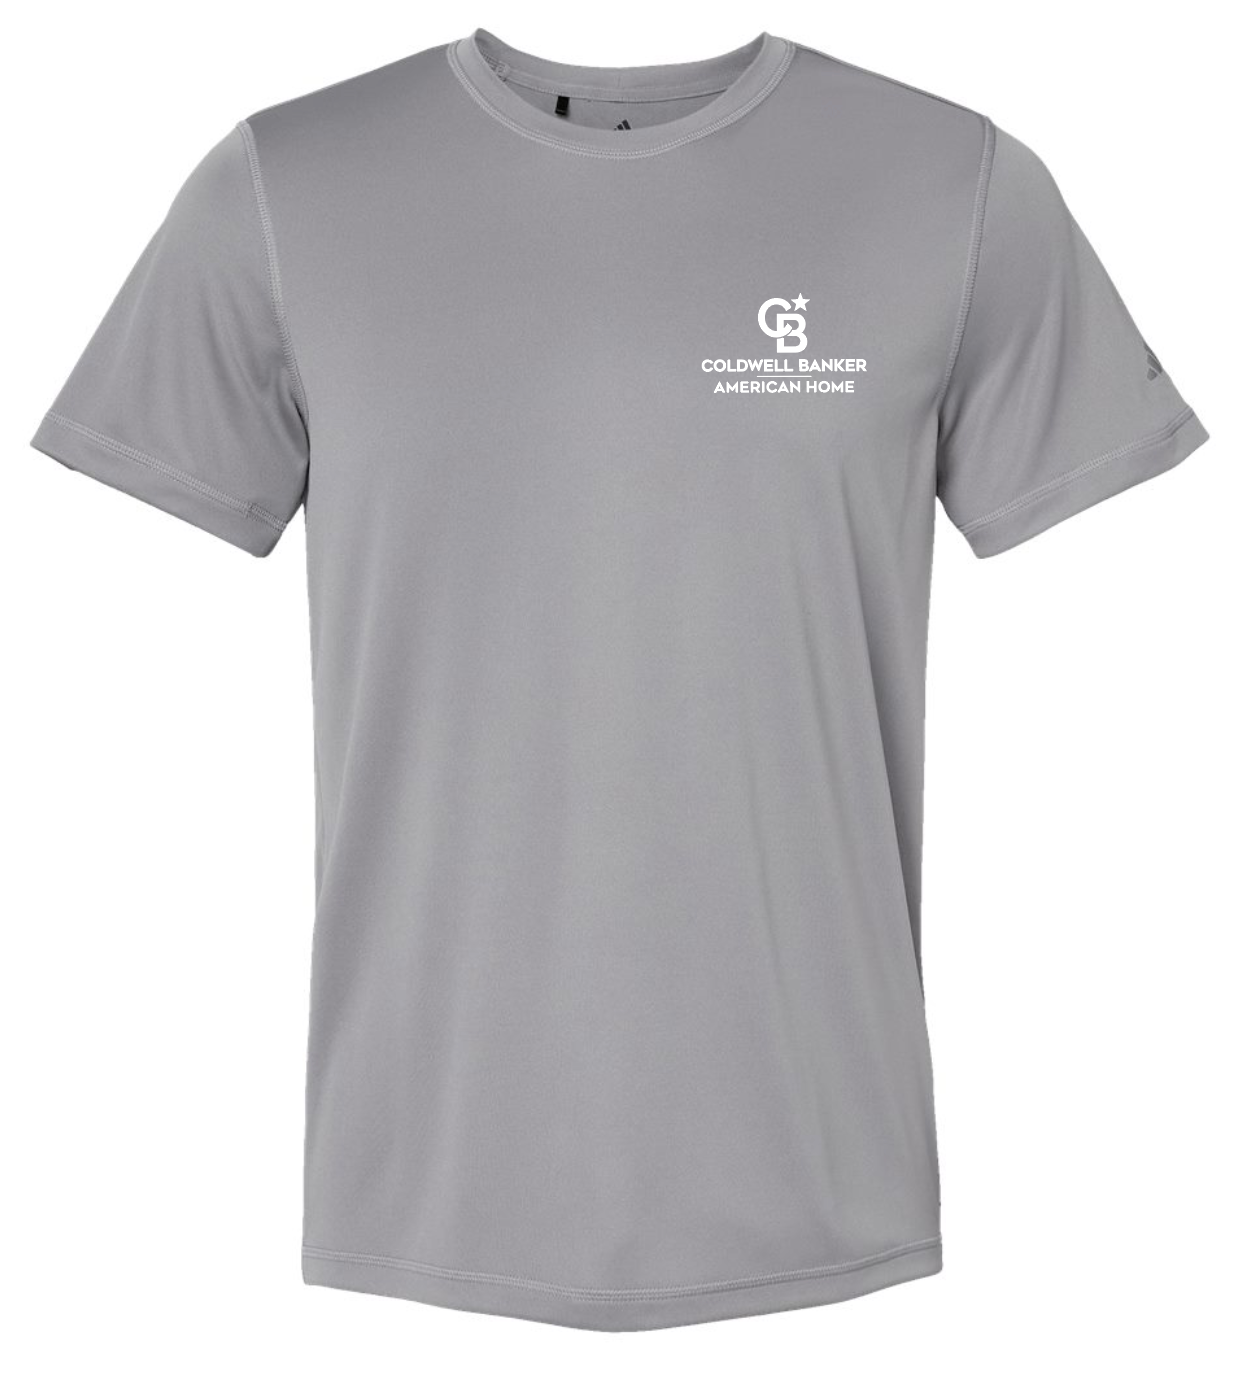 Coldwell Banker Adidas Sports T-shirt - Left Chest